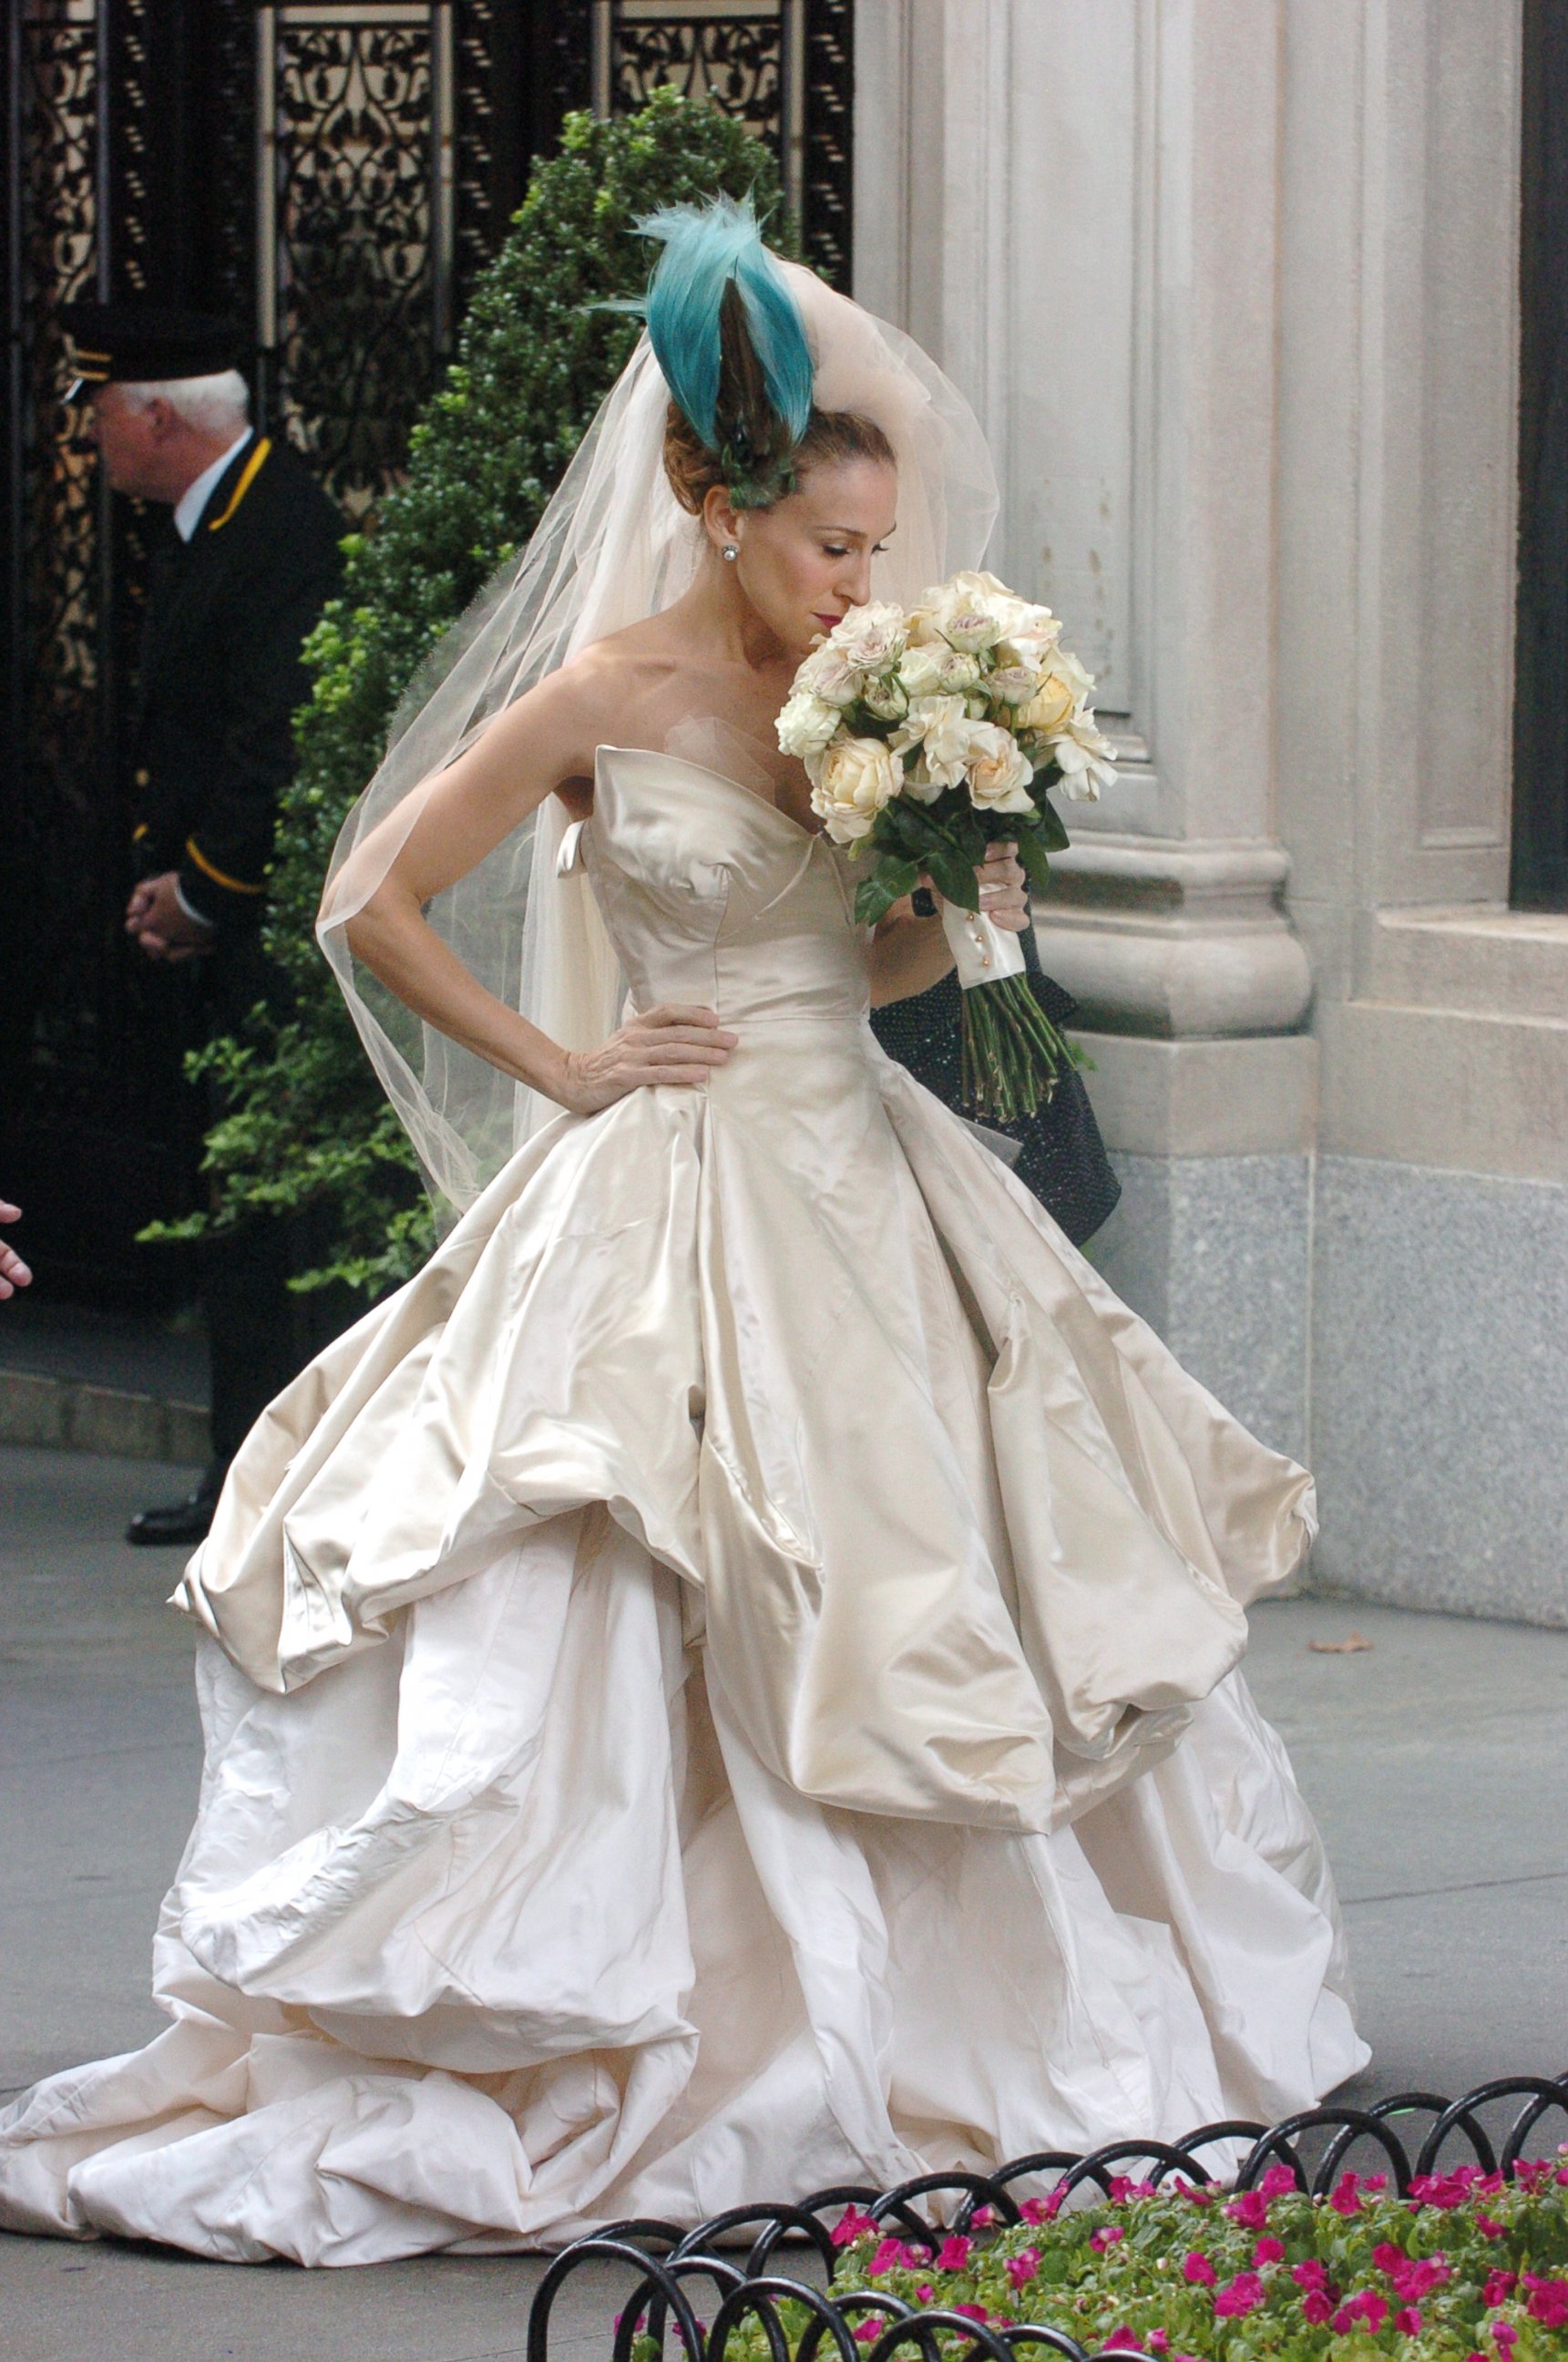 Sex and the City star Sarah Jessica Parker immortalized in a 26-pound wedding dress cake photo